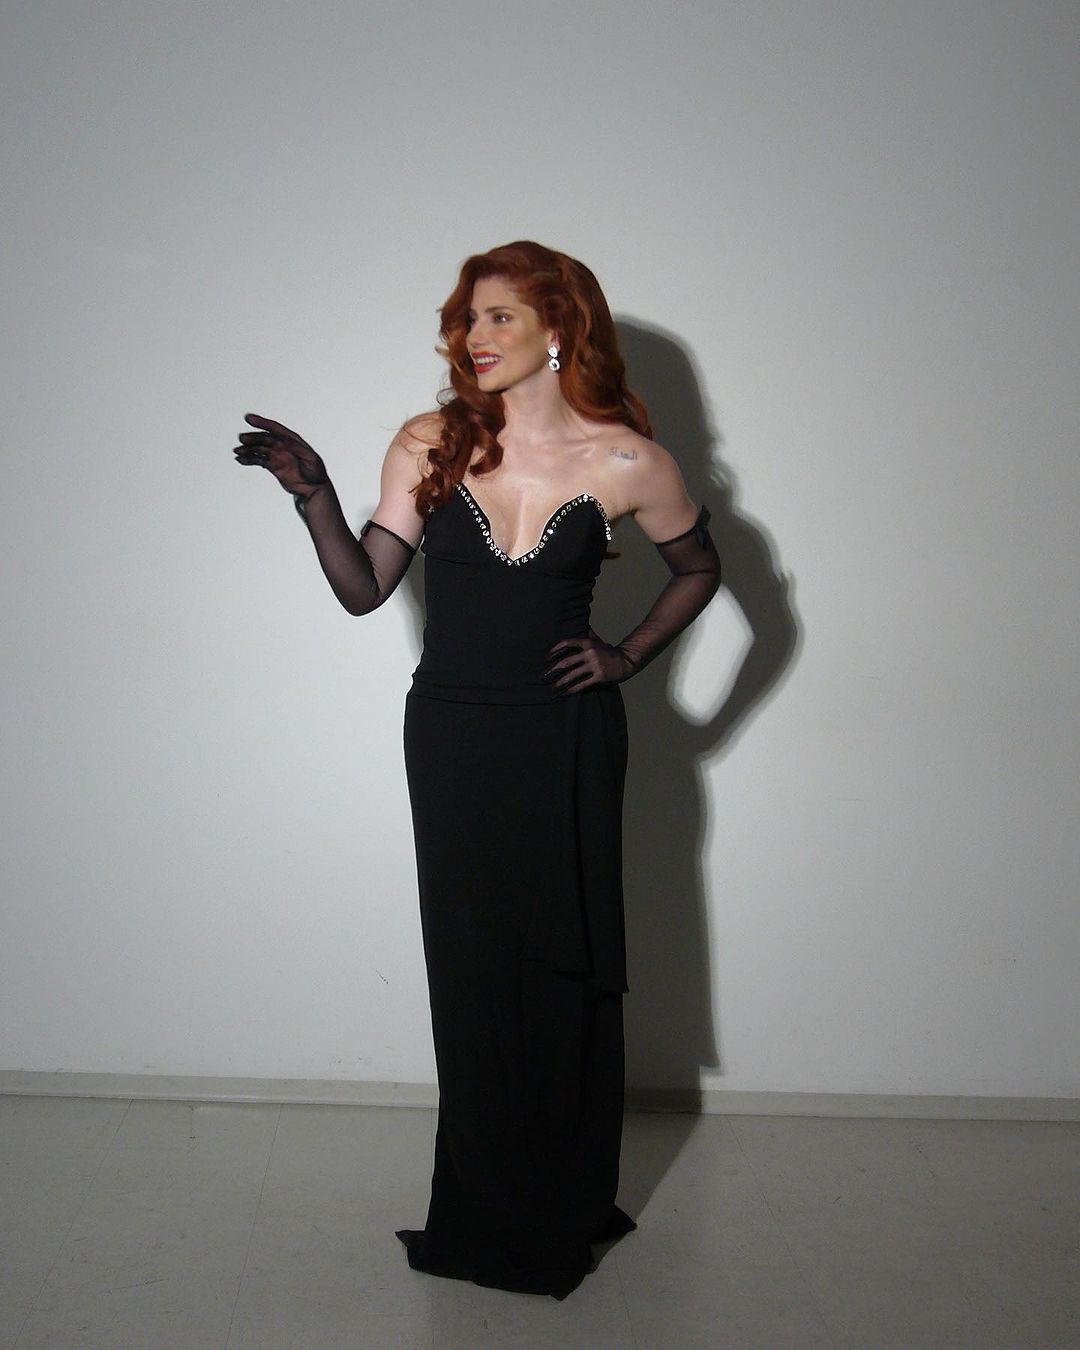 A woman posing confidently in a black gown